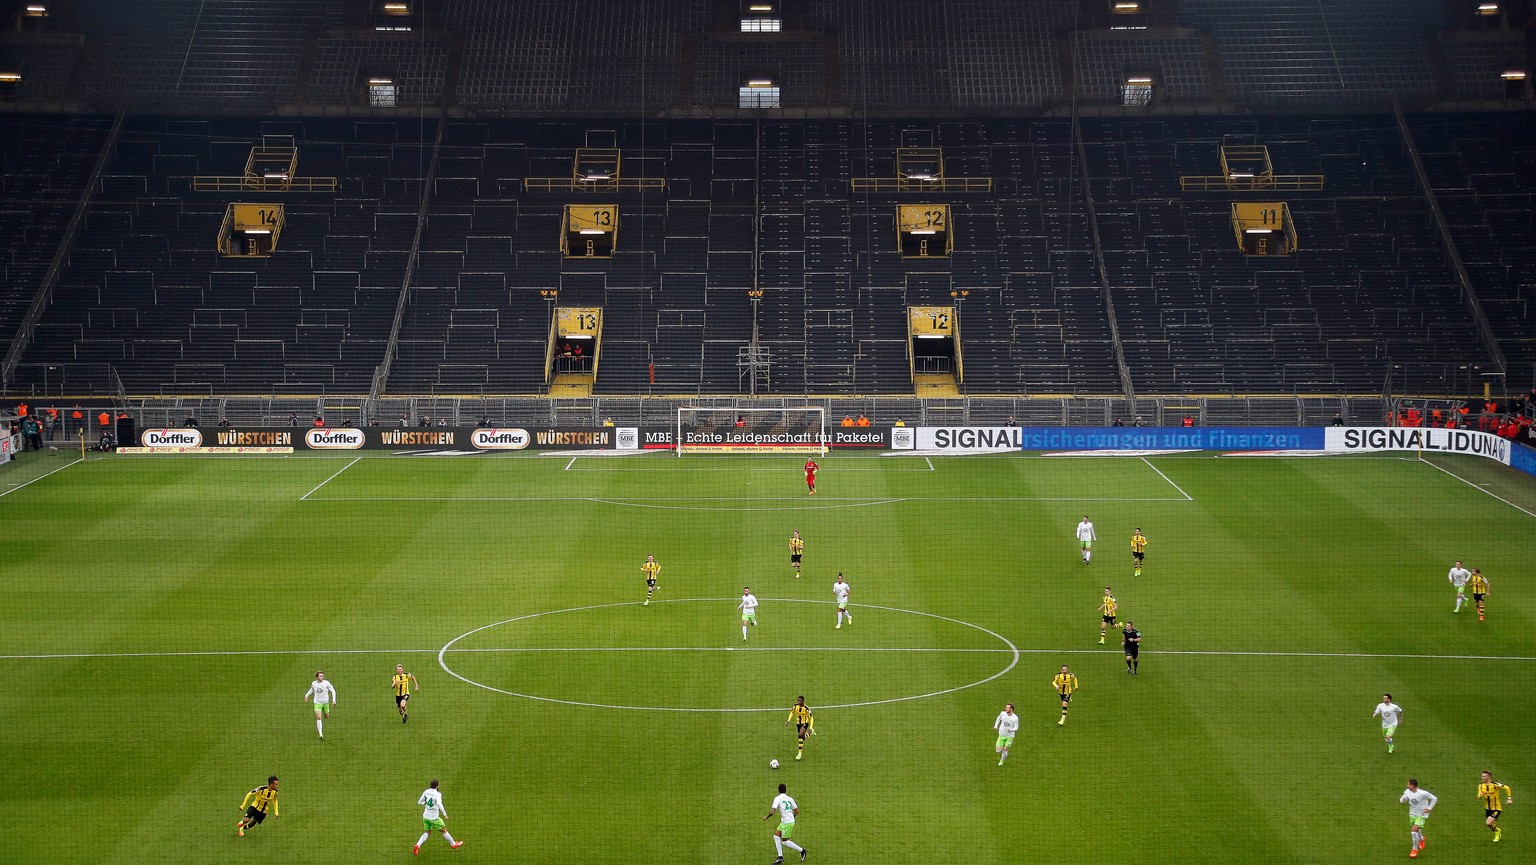 epa08407206 (FILE) - General view of the locked south stand (Suedtribuene) before the German Bundesliga soccer match between Borussia Dortmund and VfL Wolfsburg in Dortmund, Germany, 18 February 2017  ...